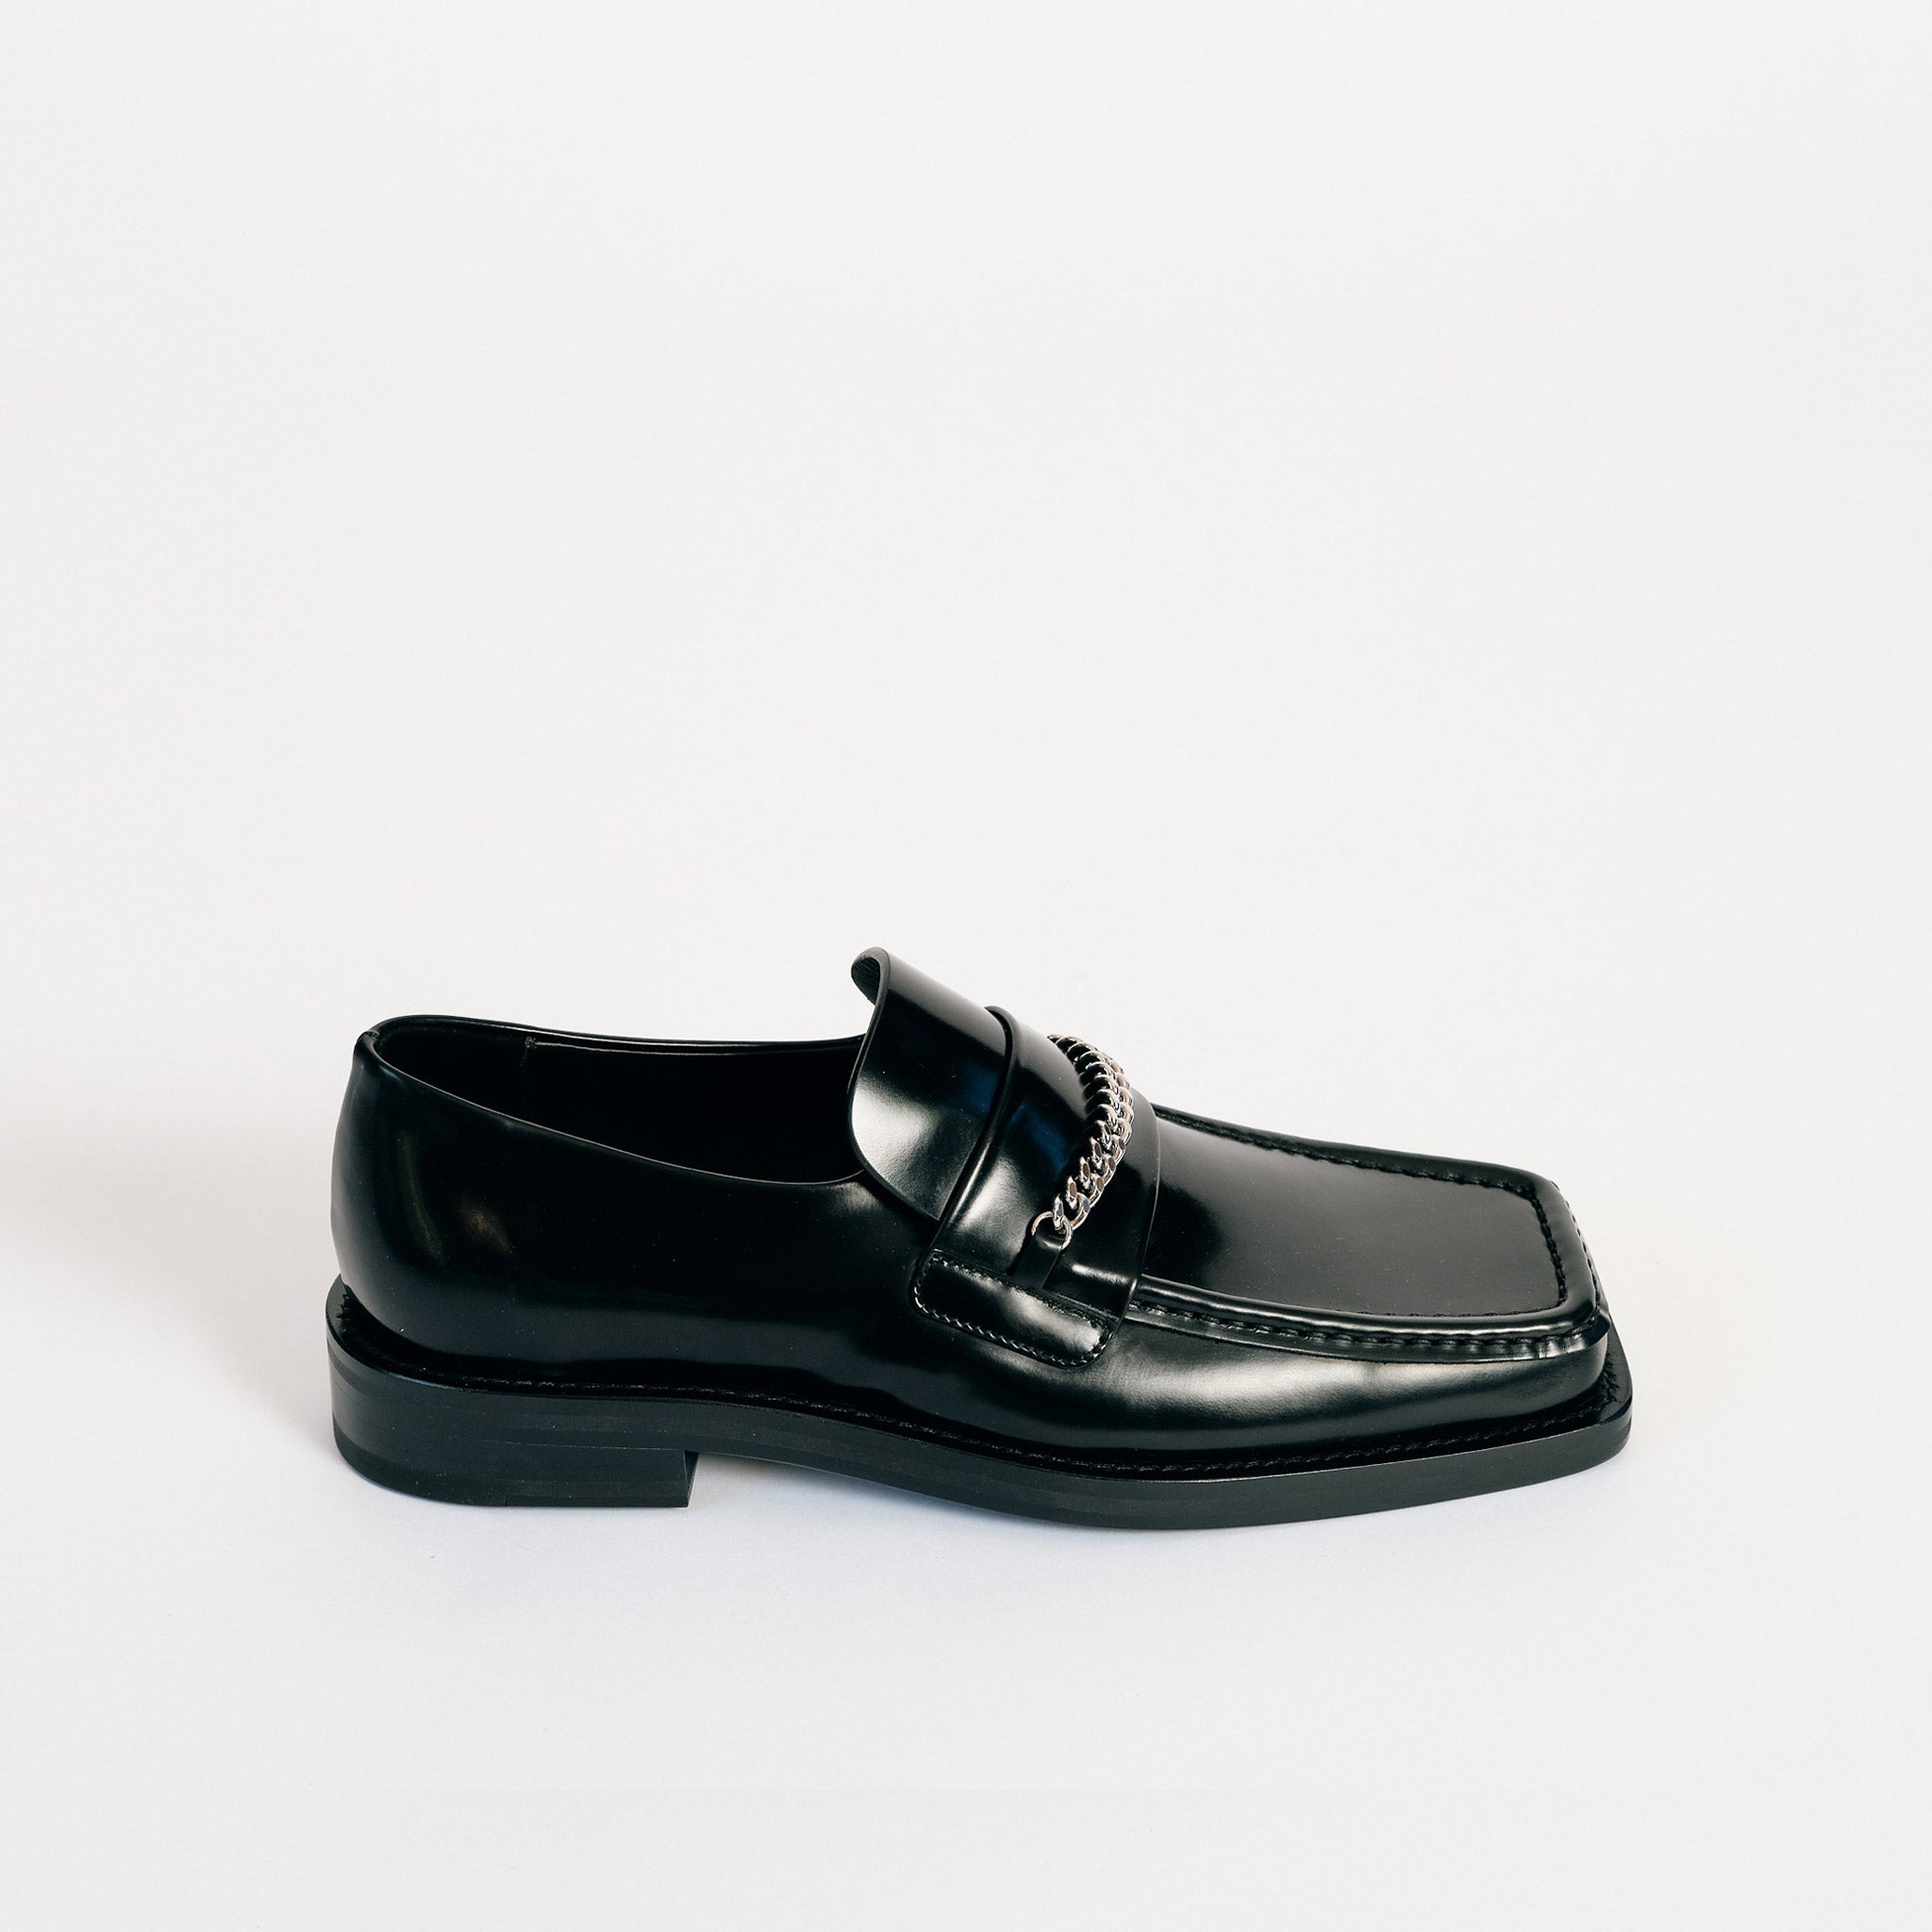 Martine Rose   Square Toe Loafer   available at LCD